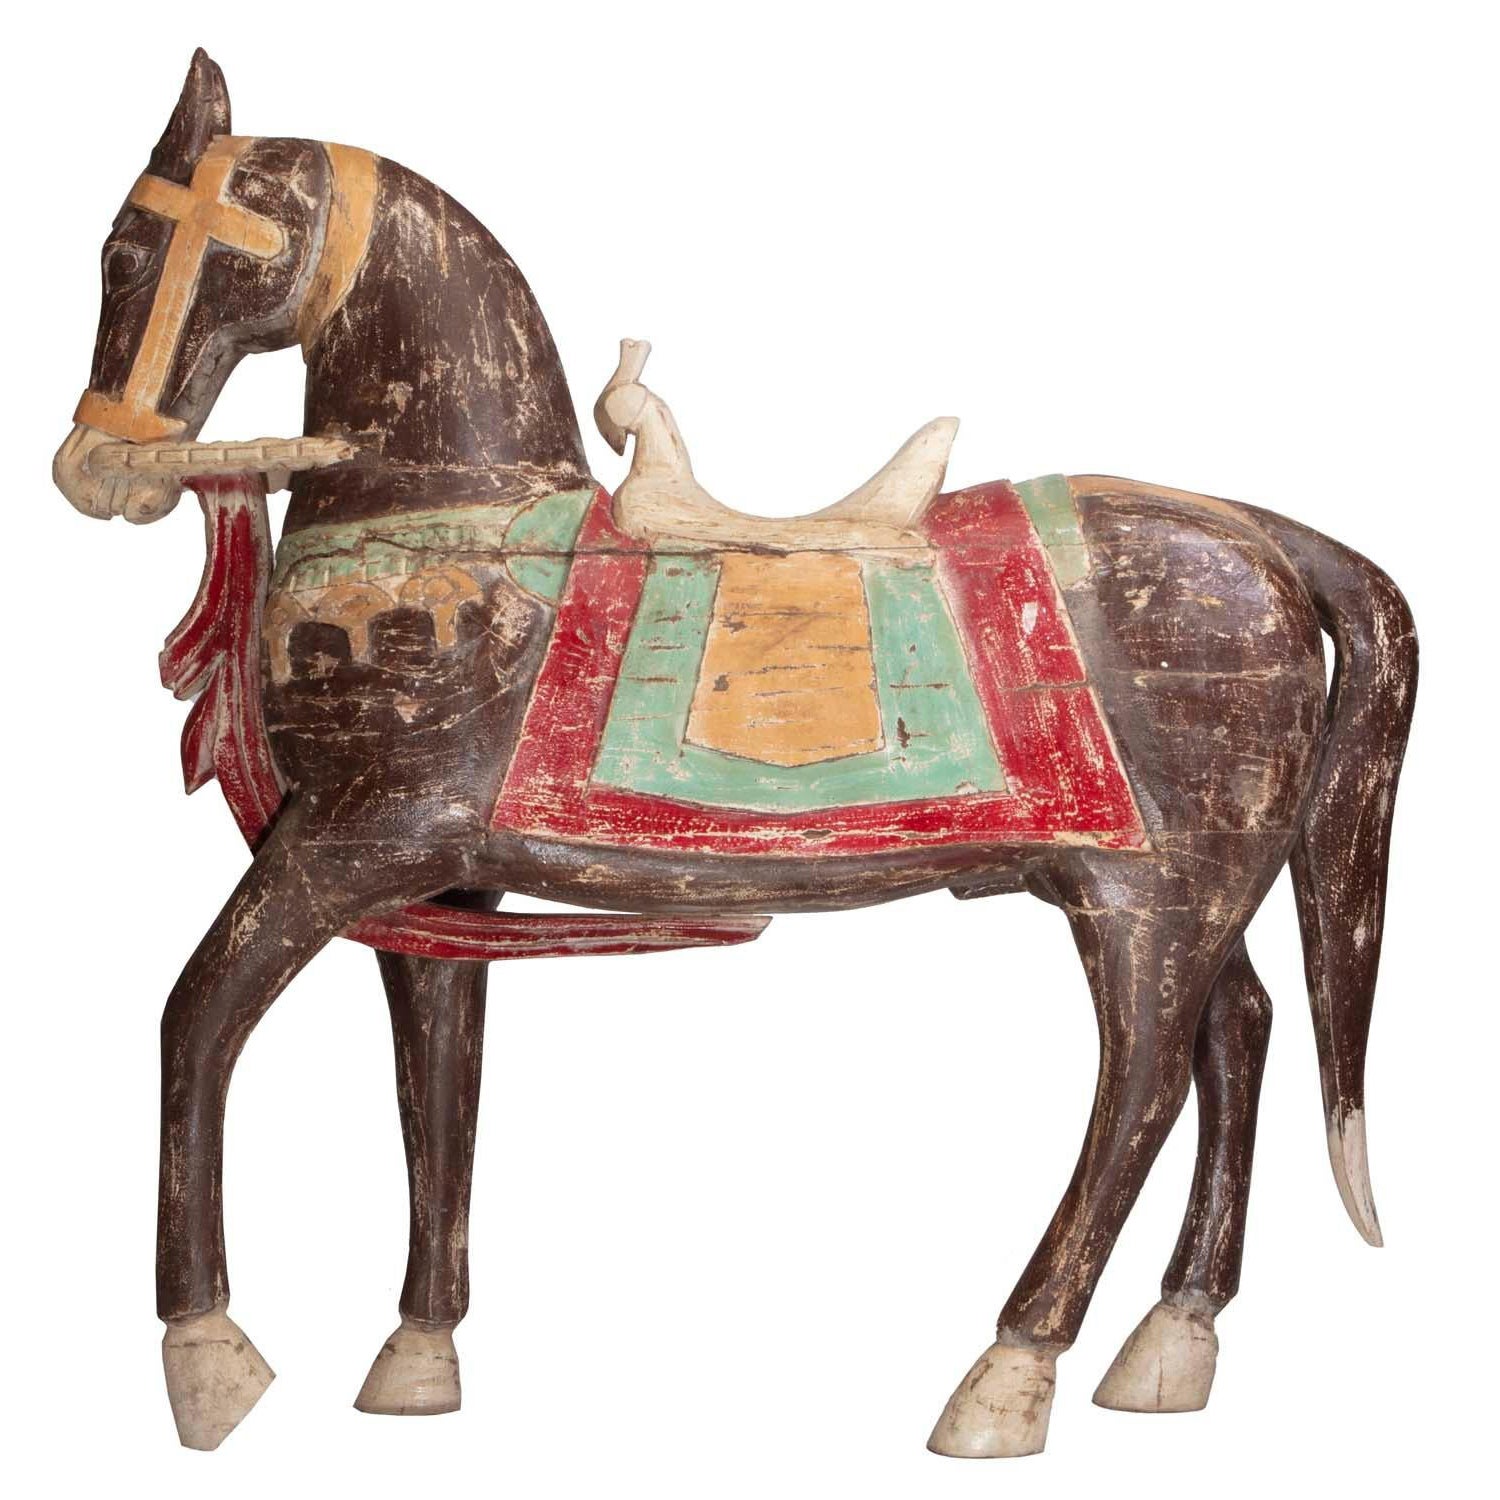 Four Foot Tall Antique Hand-Painted Wooden Horse with Bird Saddle from India